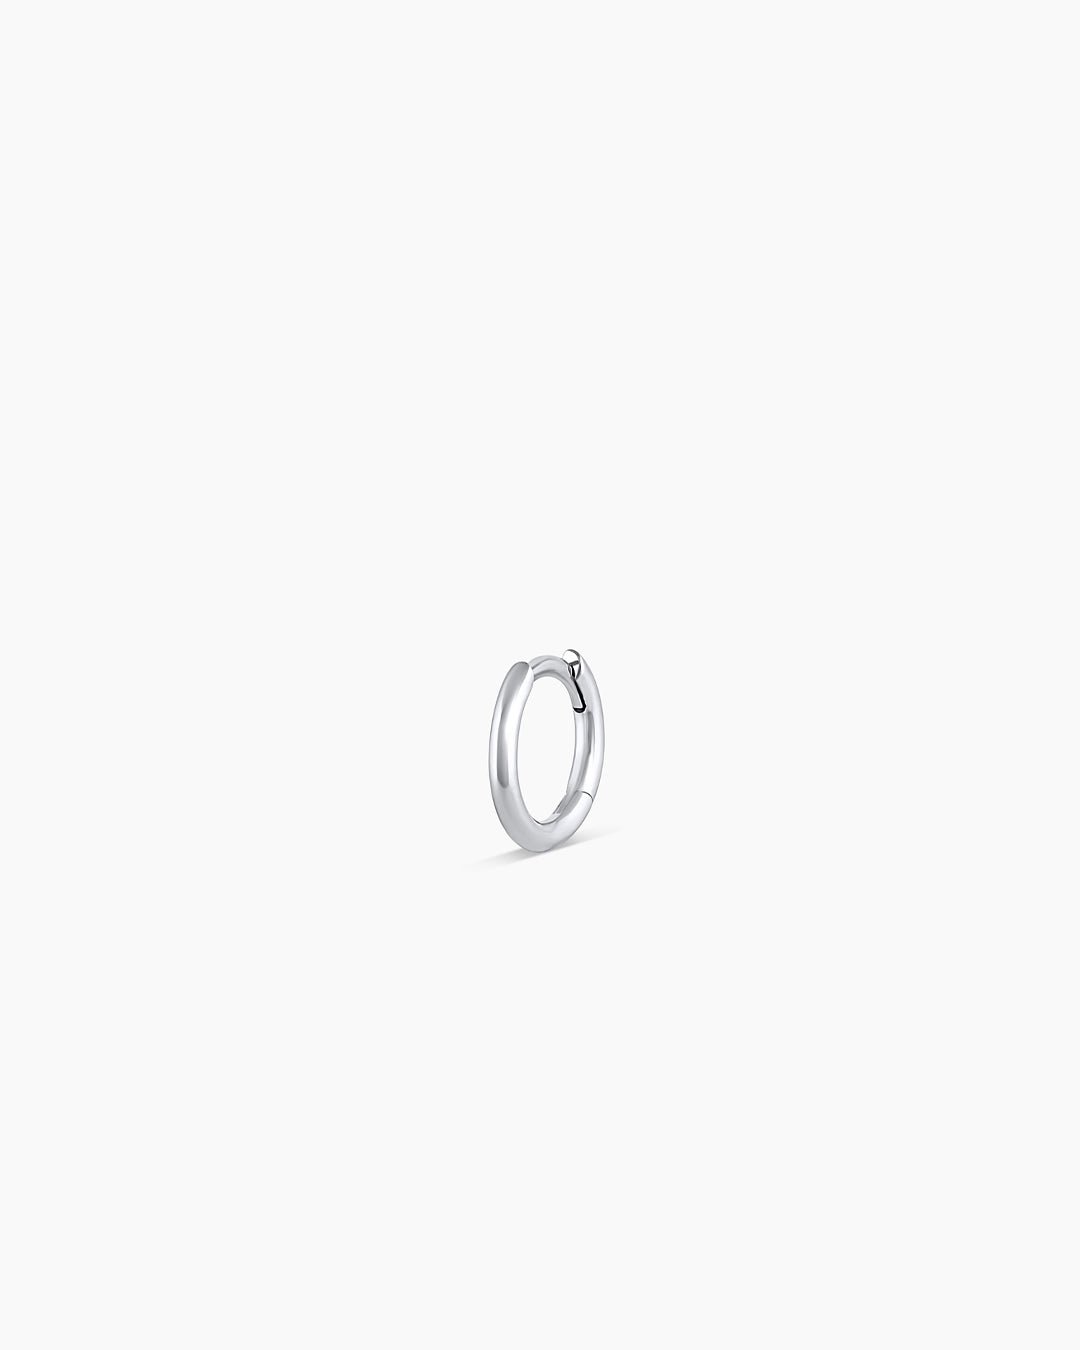 Woman wearing Classic Gold Huggie || option::14k Solid White Gold, 8mm, Single